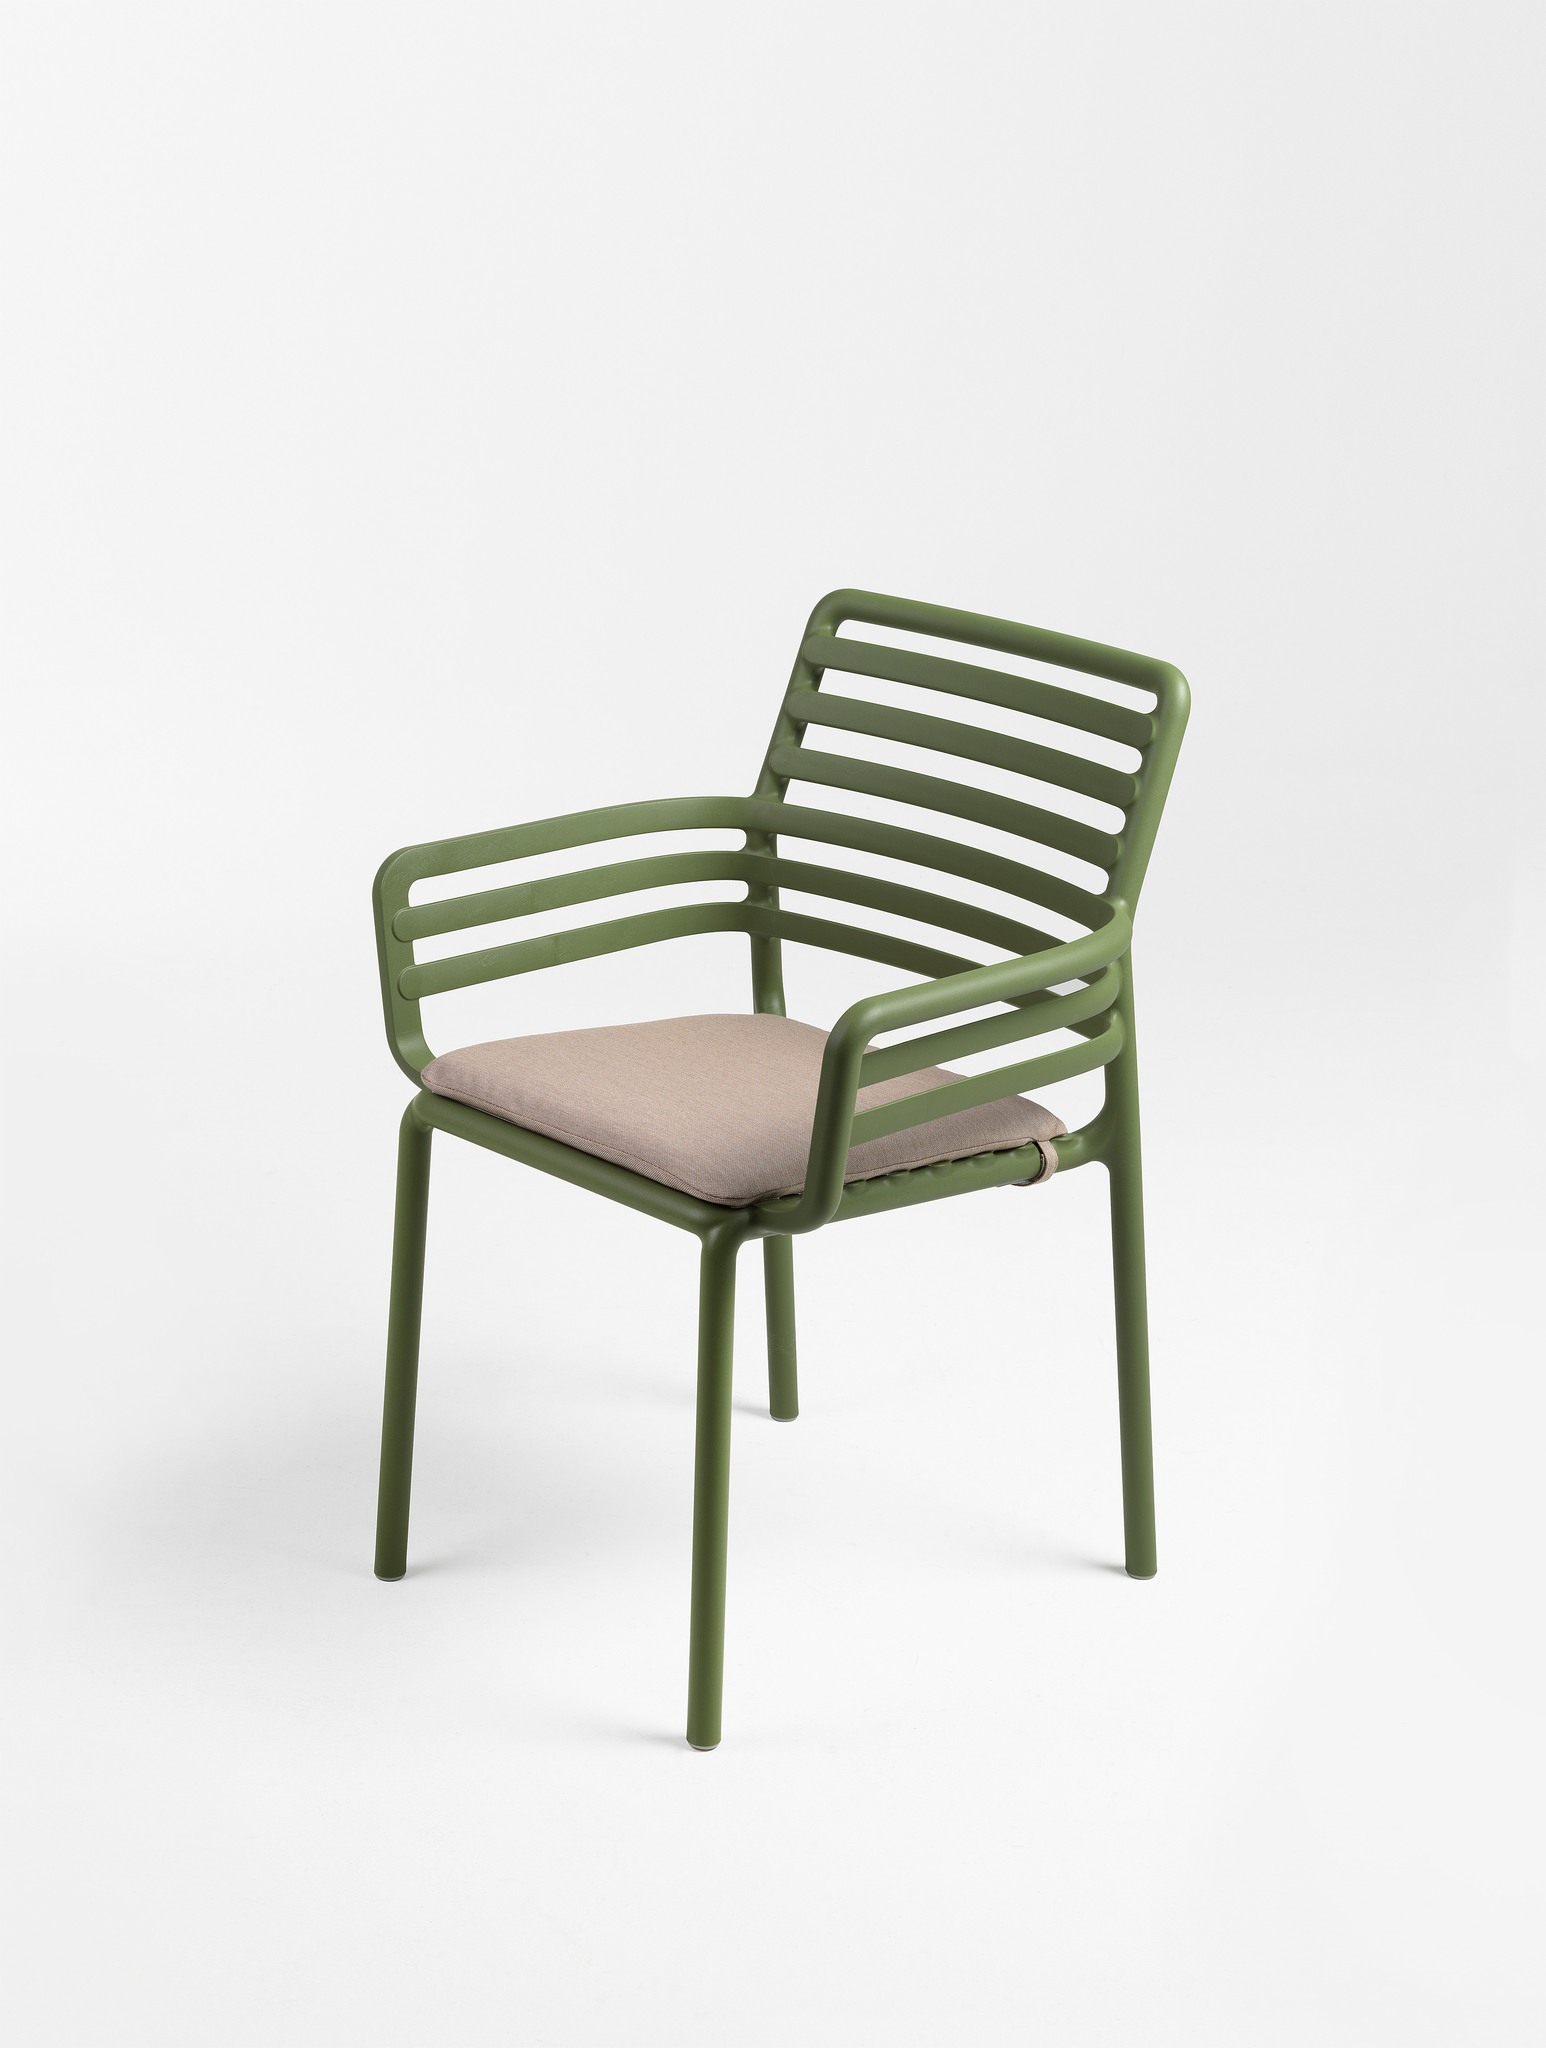 Fresh, light and ergonomic, Nardi Doga Armchair is for outdoor use and made of fiberglass resin. It is inspired by a sla... » Outdoor Furniture Fuengirola, Costa Del Sol, Spain